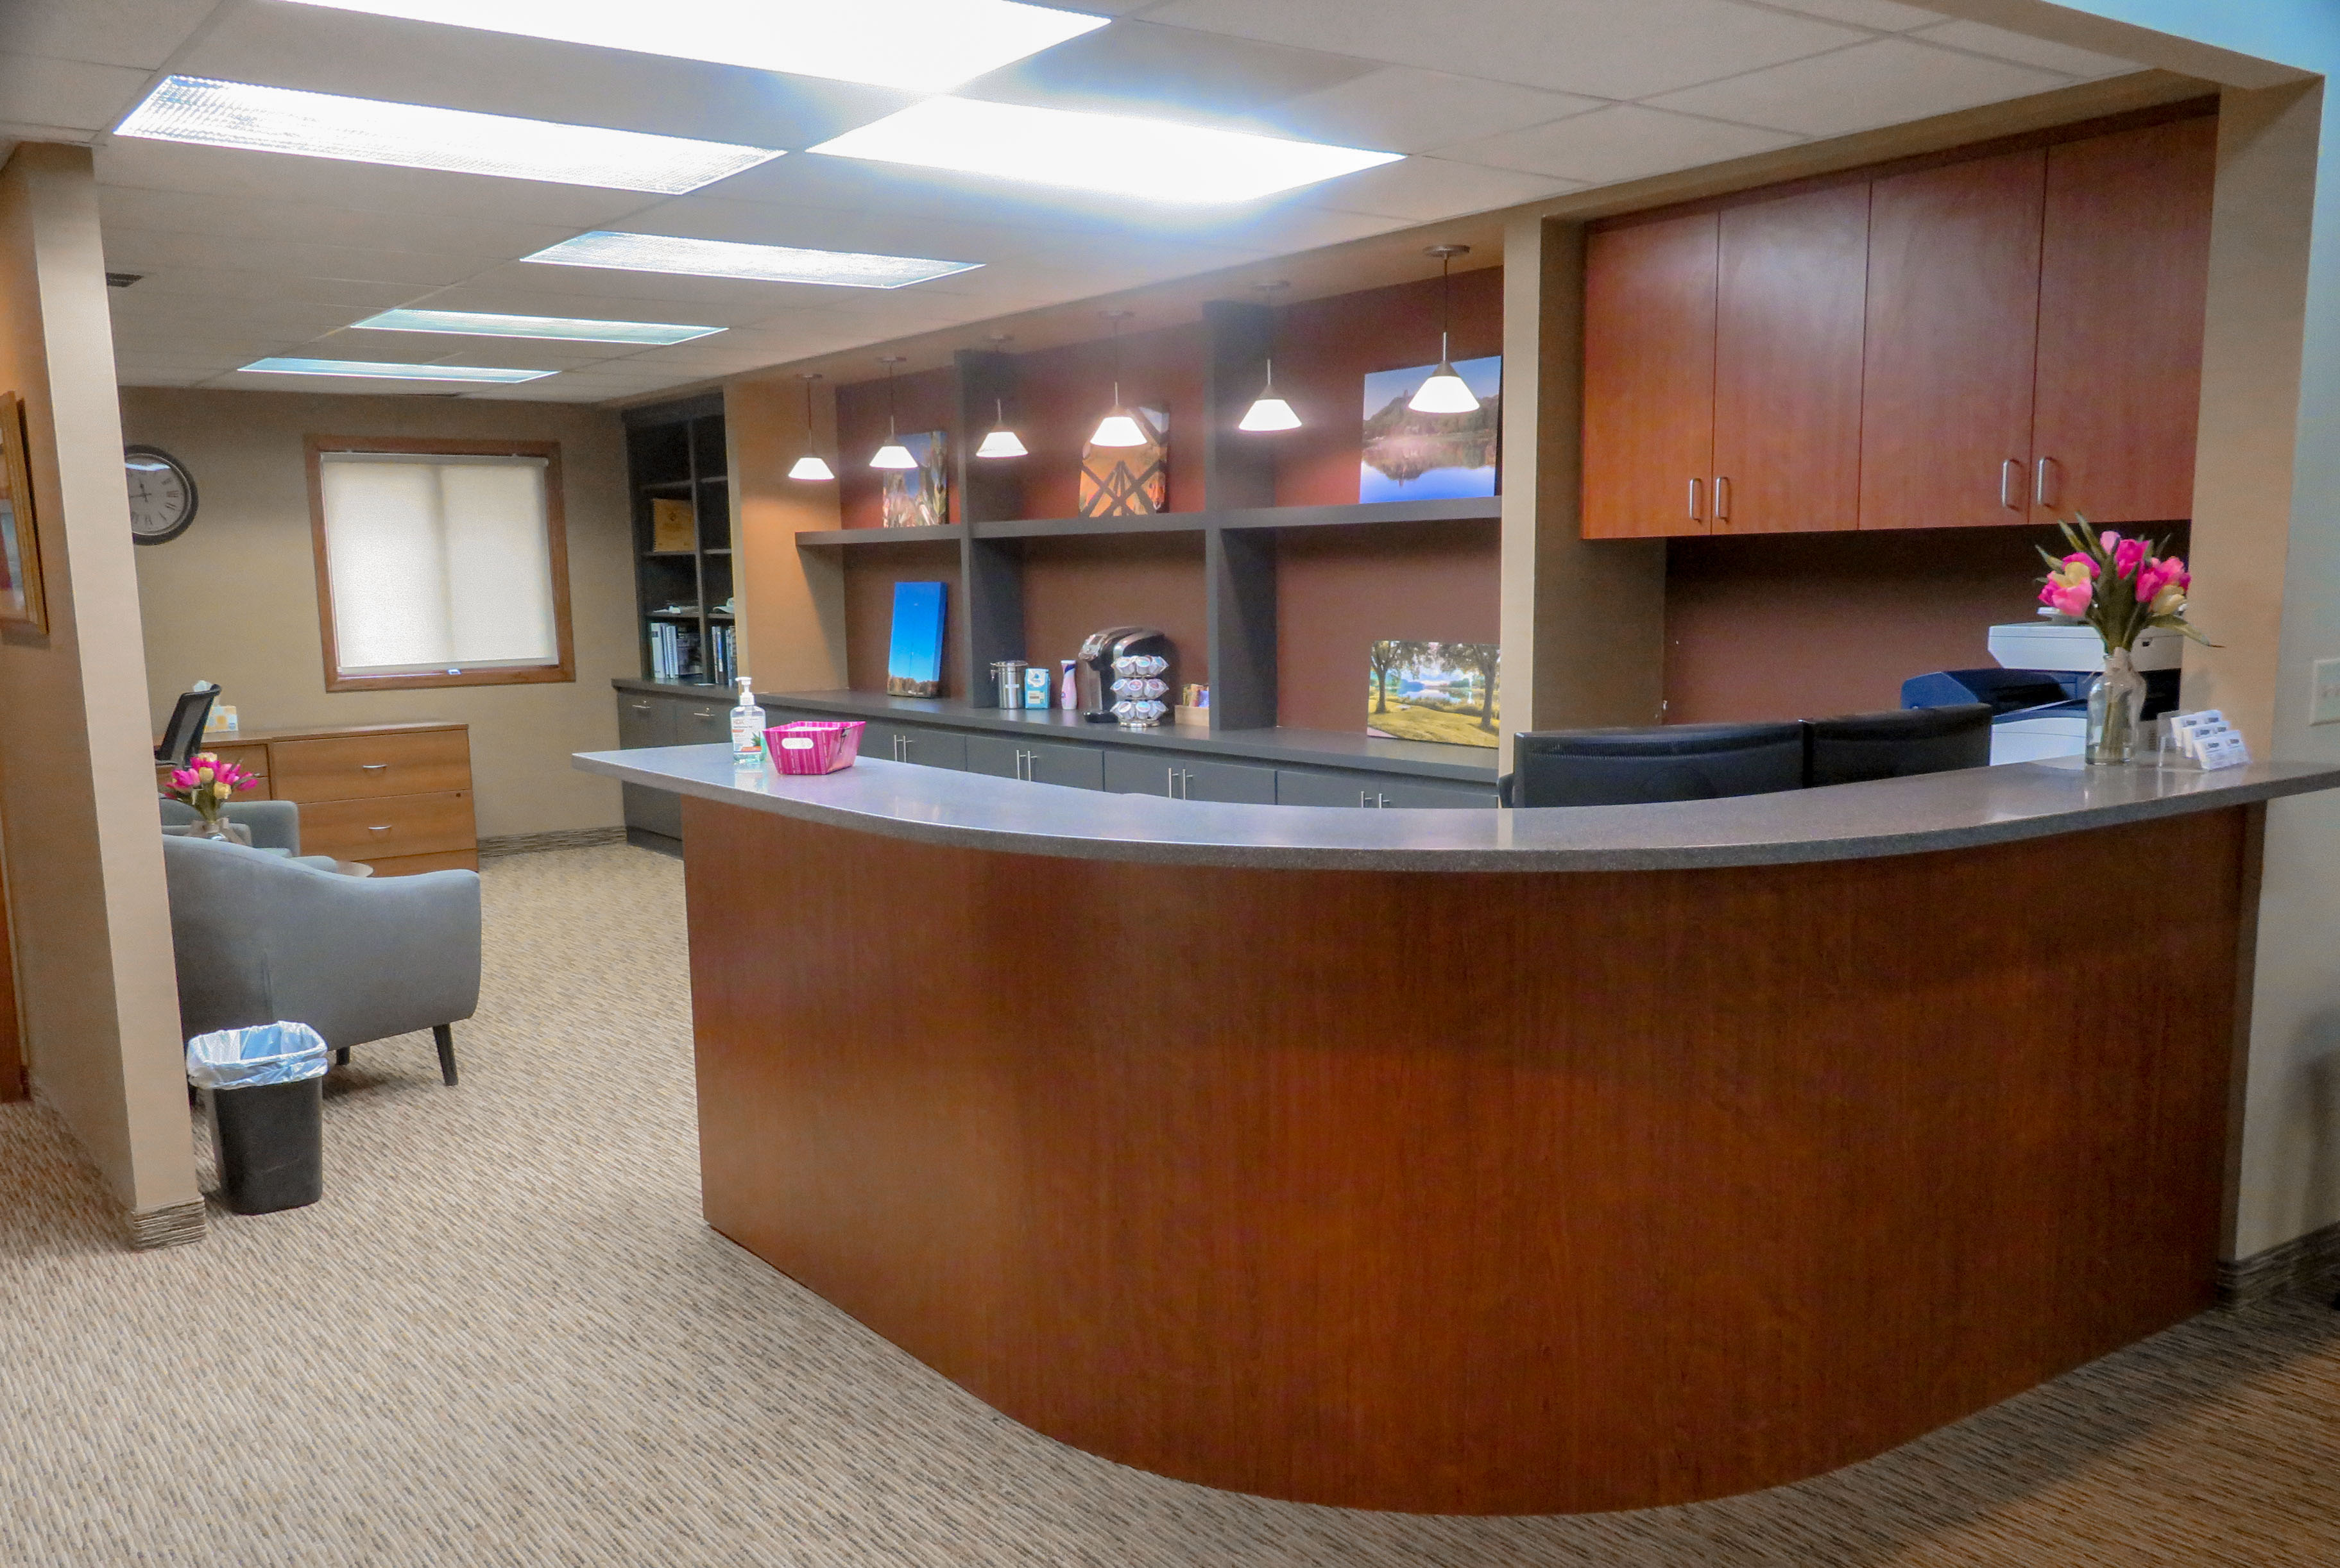 Photo of the remodeled reception area of the new building. Photo shows a desk and part of an alcove with chairs and items on the wall.